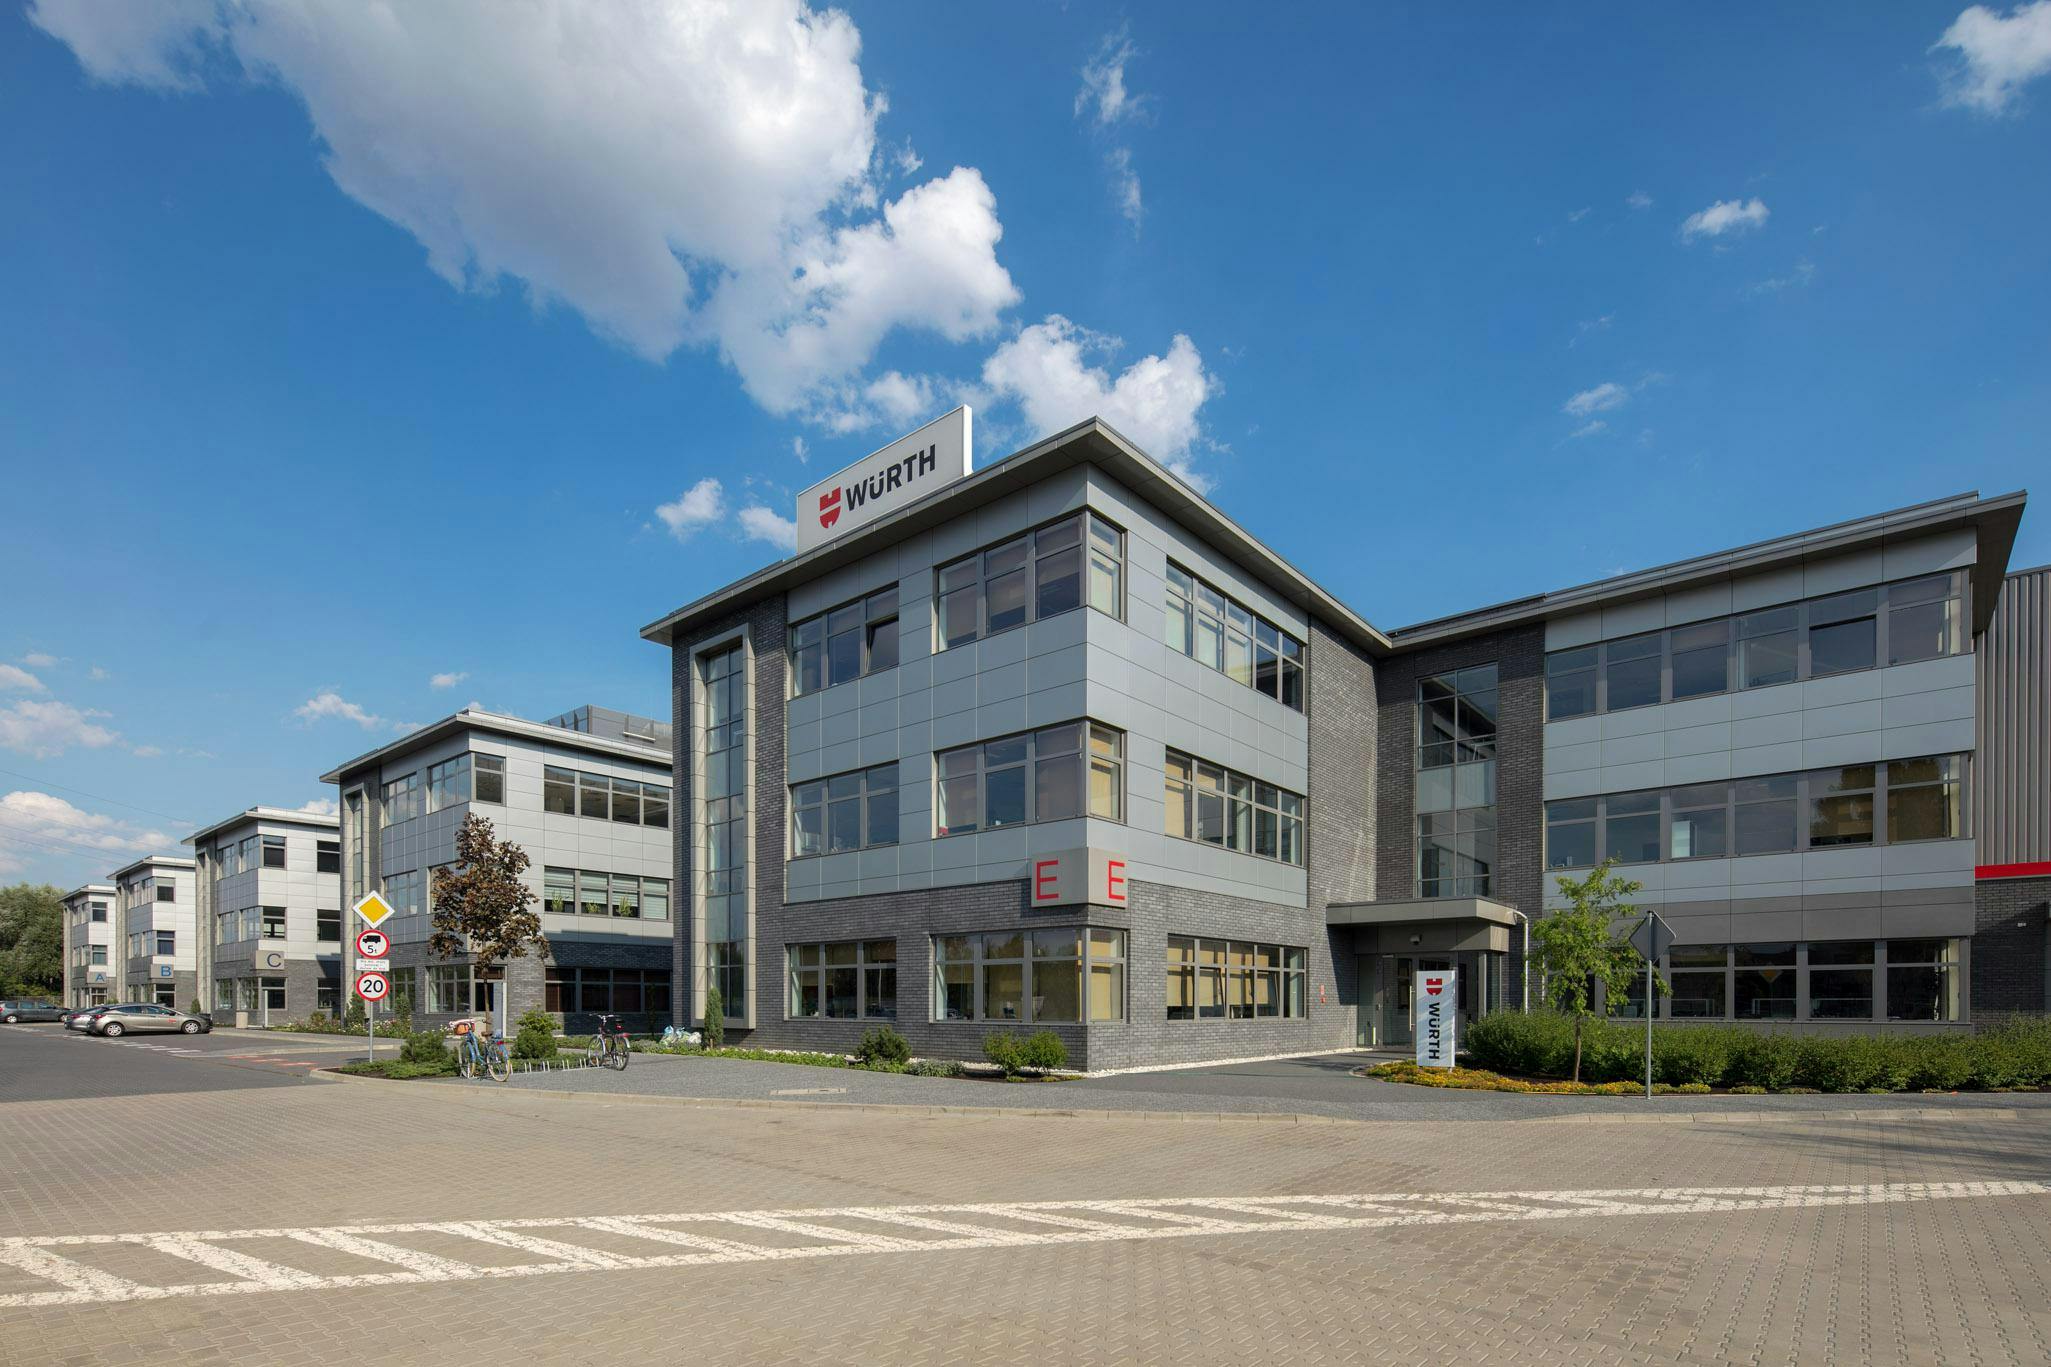 Offices for rent in Offices Diamond Business Park Ursus Faza II - Budynek F #2